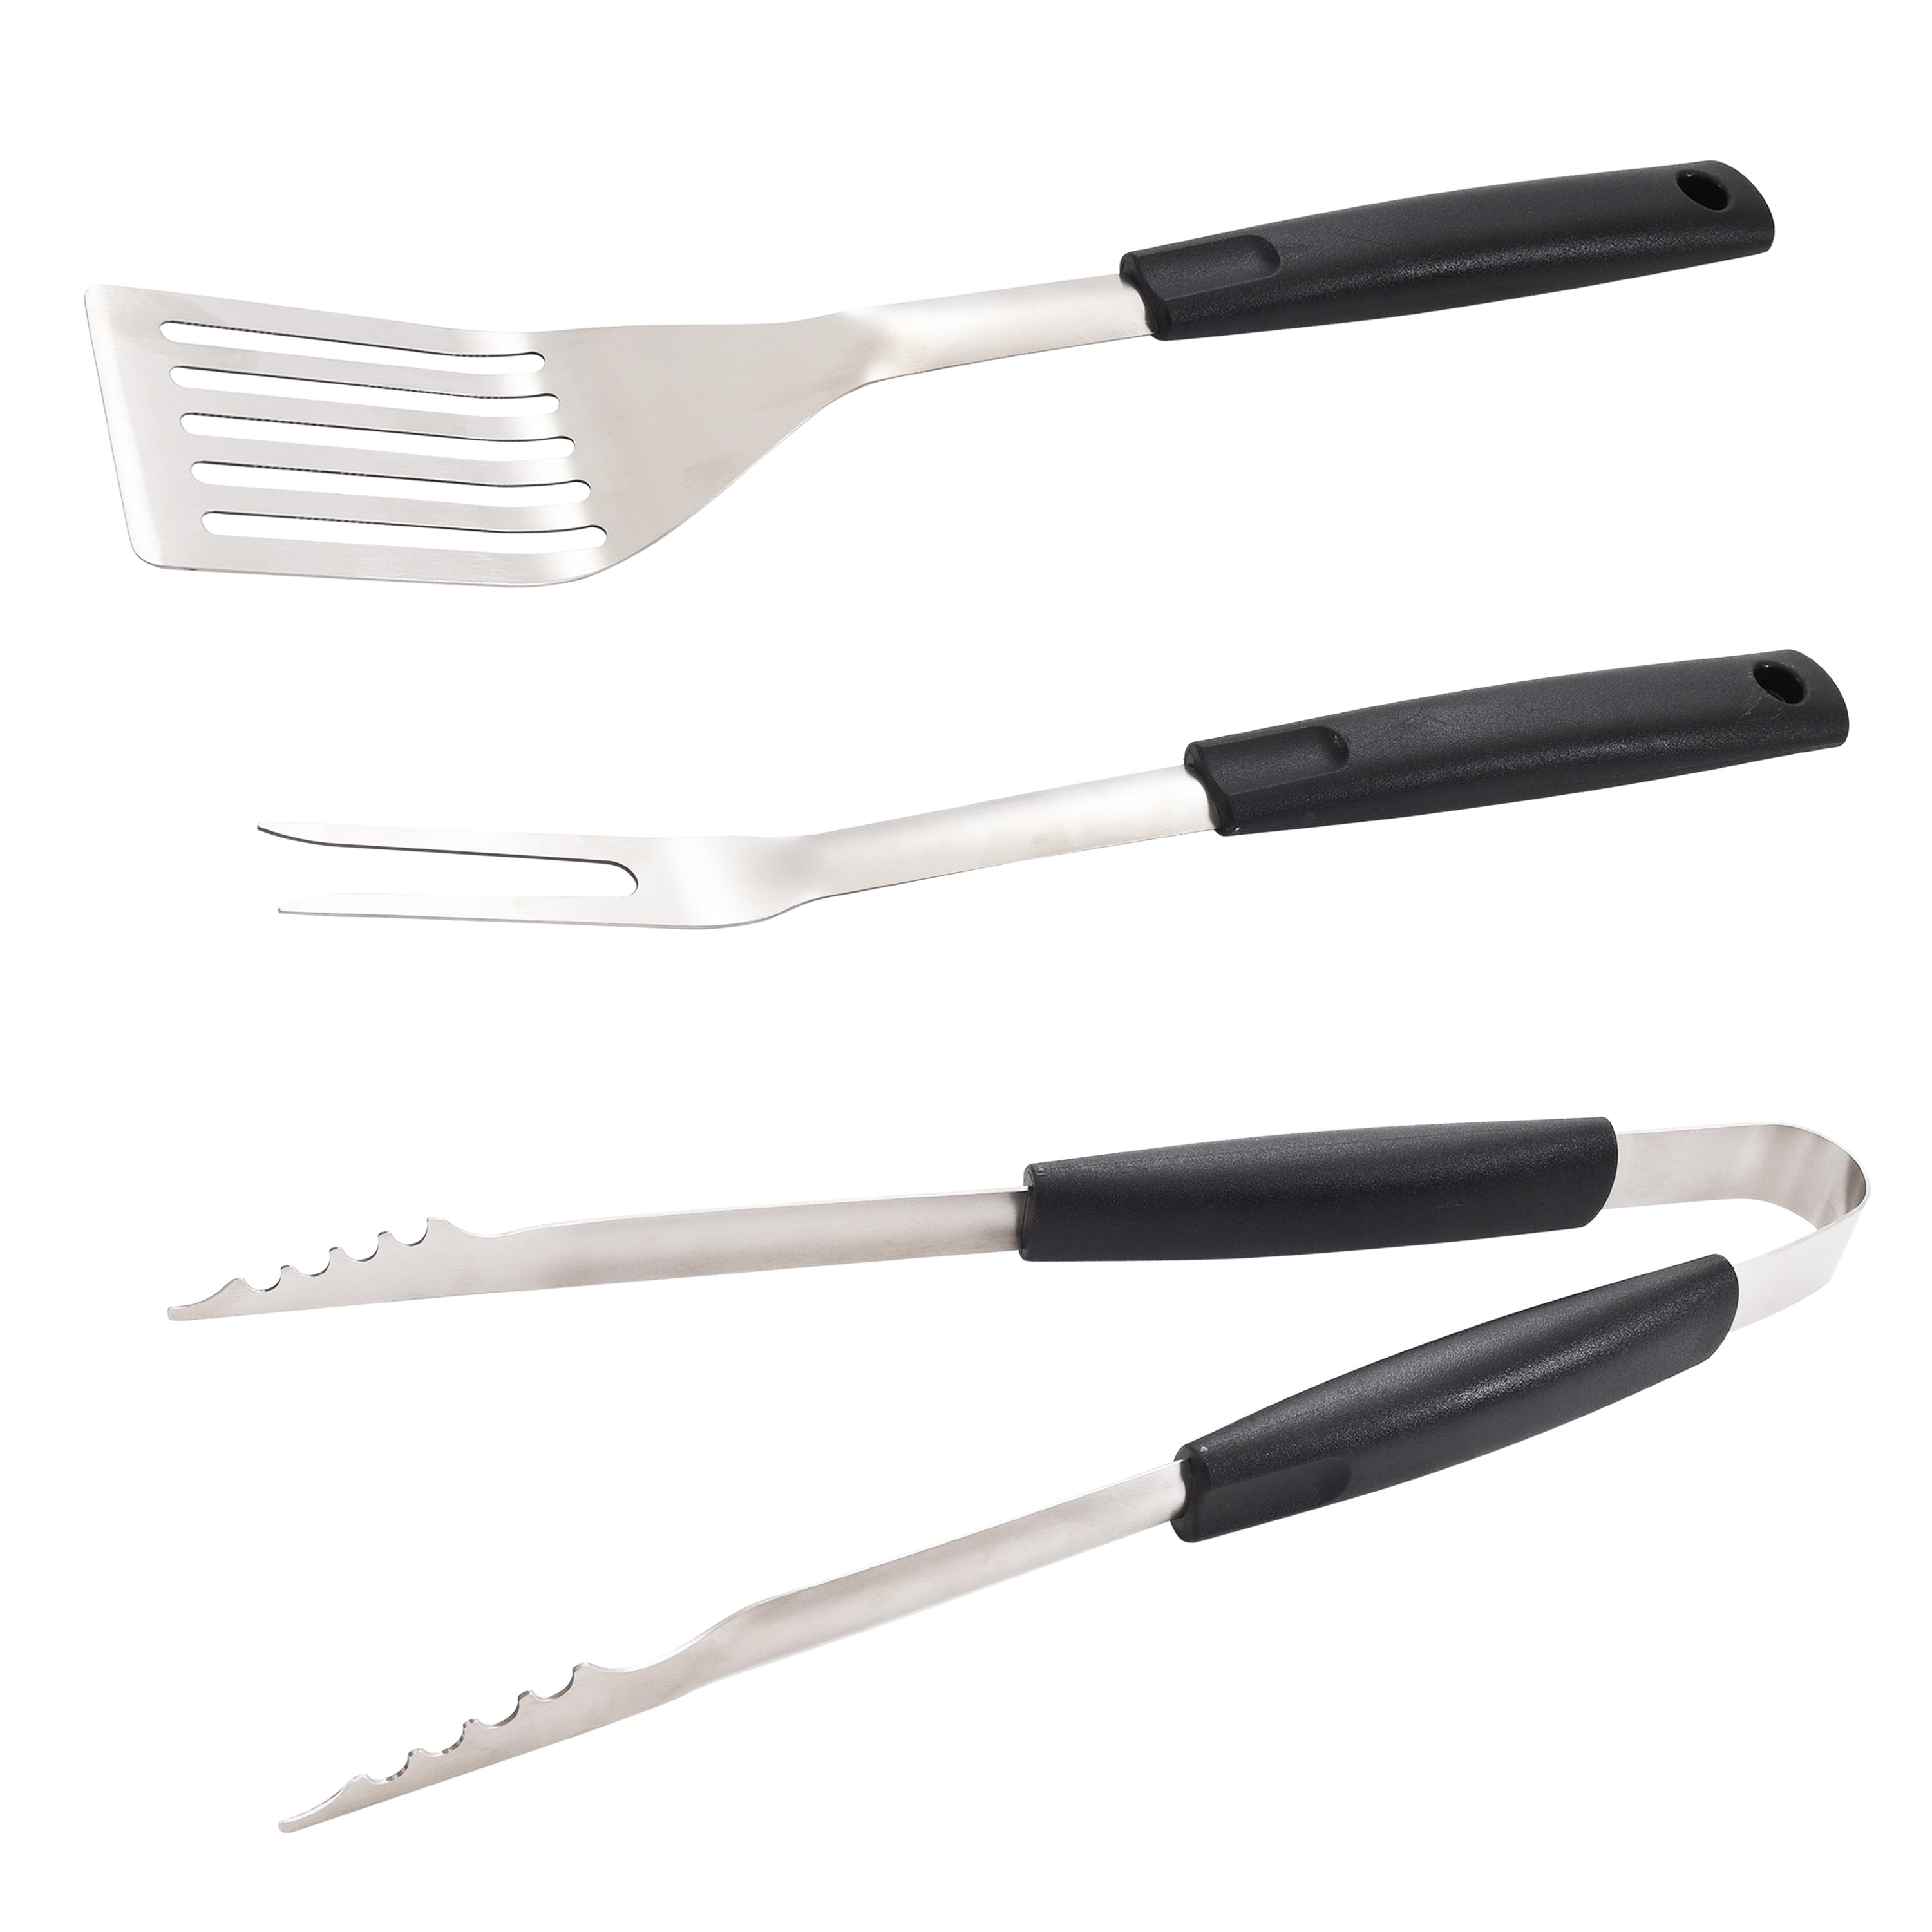 FAMILY MAID 3 Piece Grill Tool Set (3-In-1 BBQ Grill Brush,Grill  Cleaner,Turner)